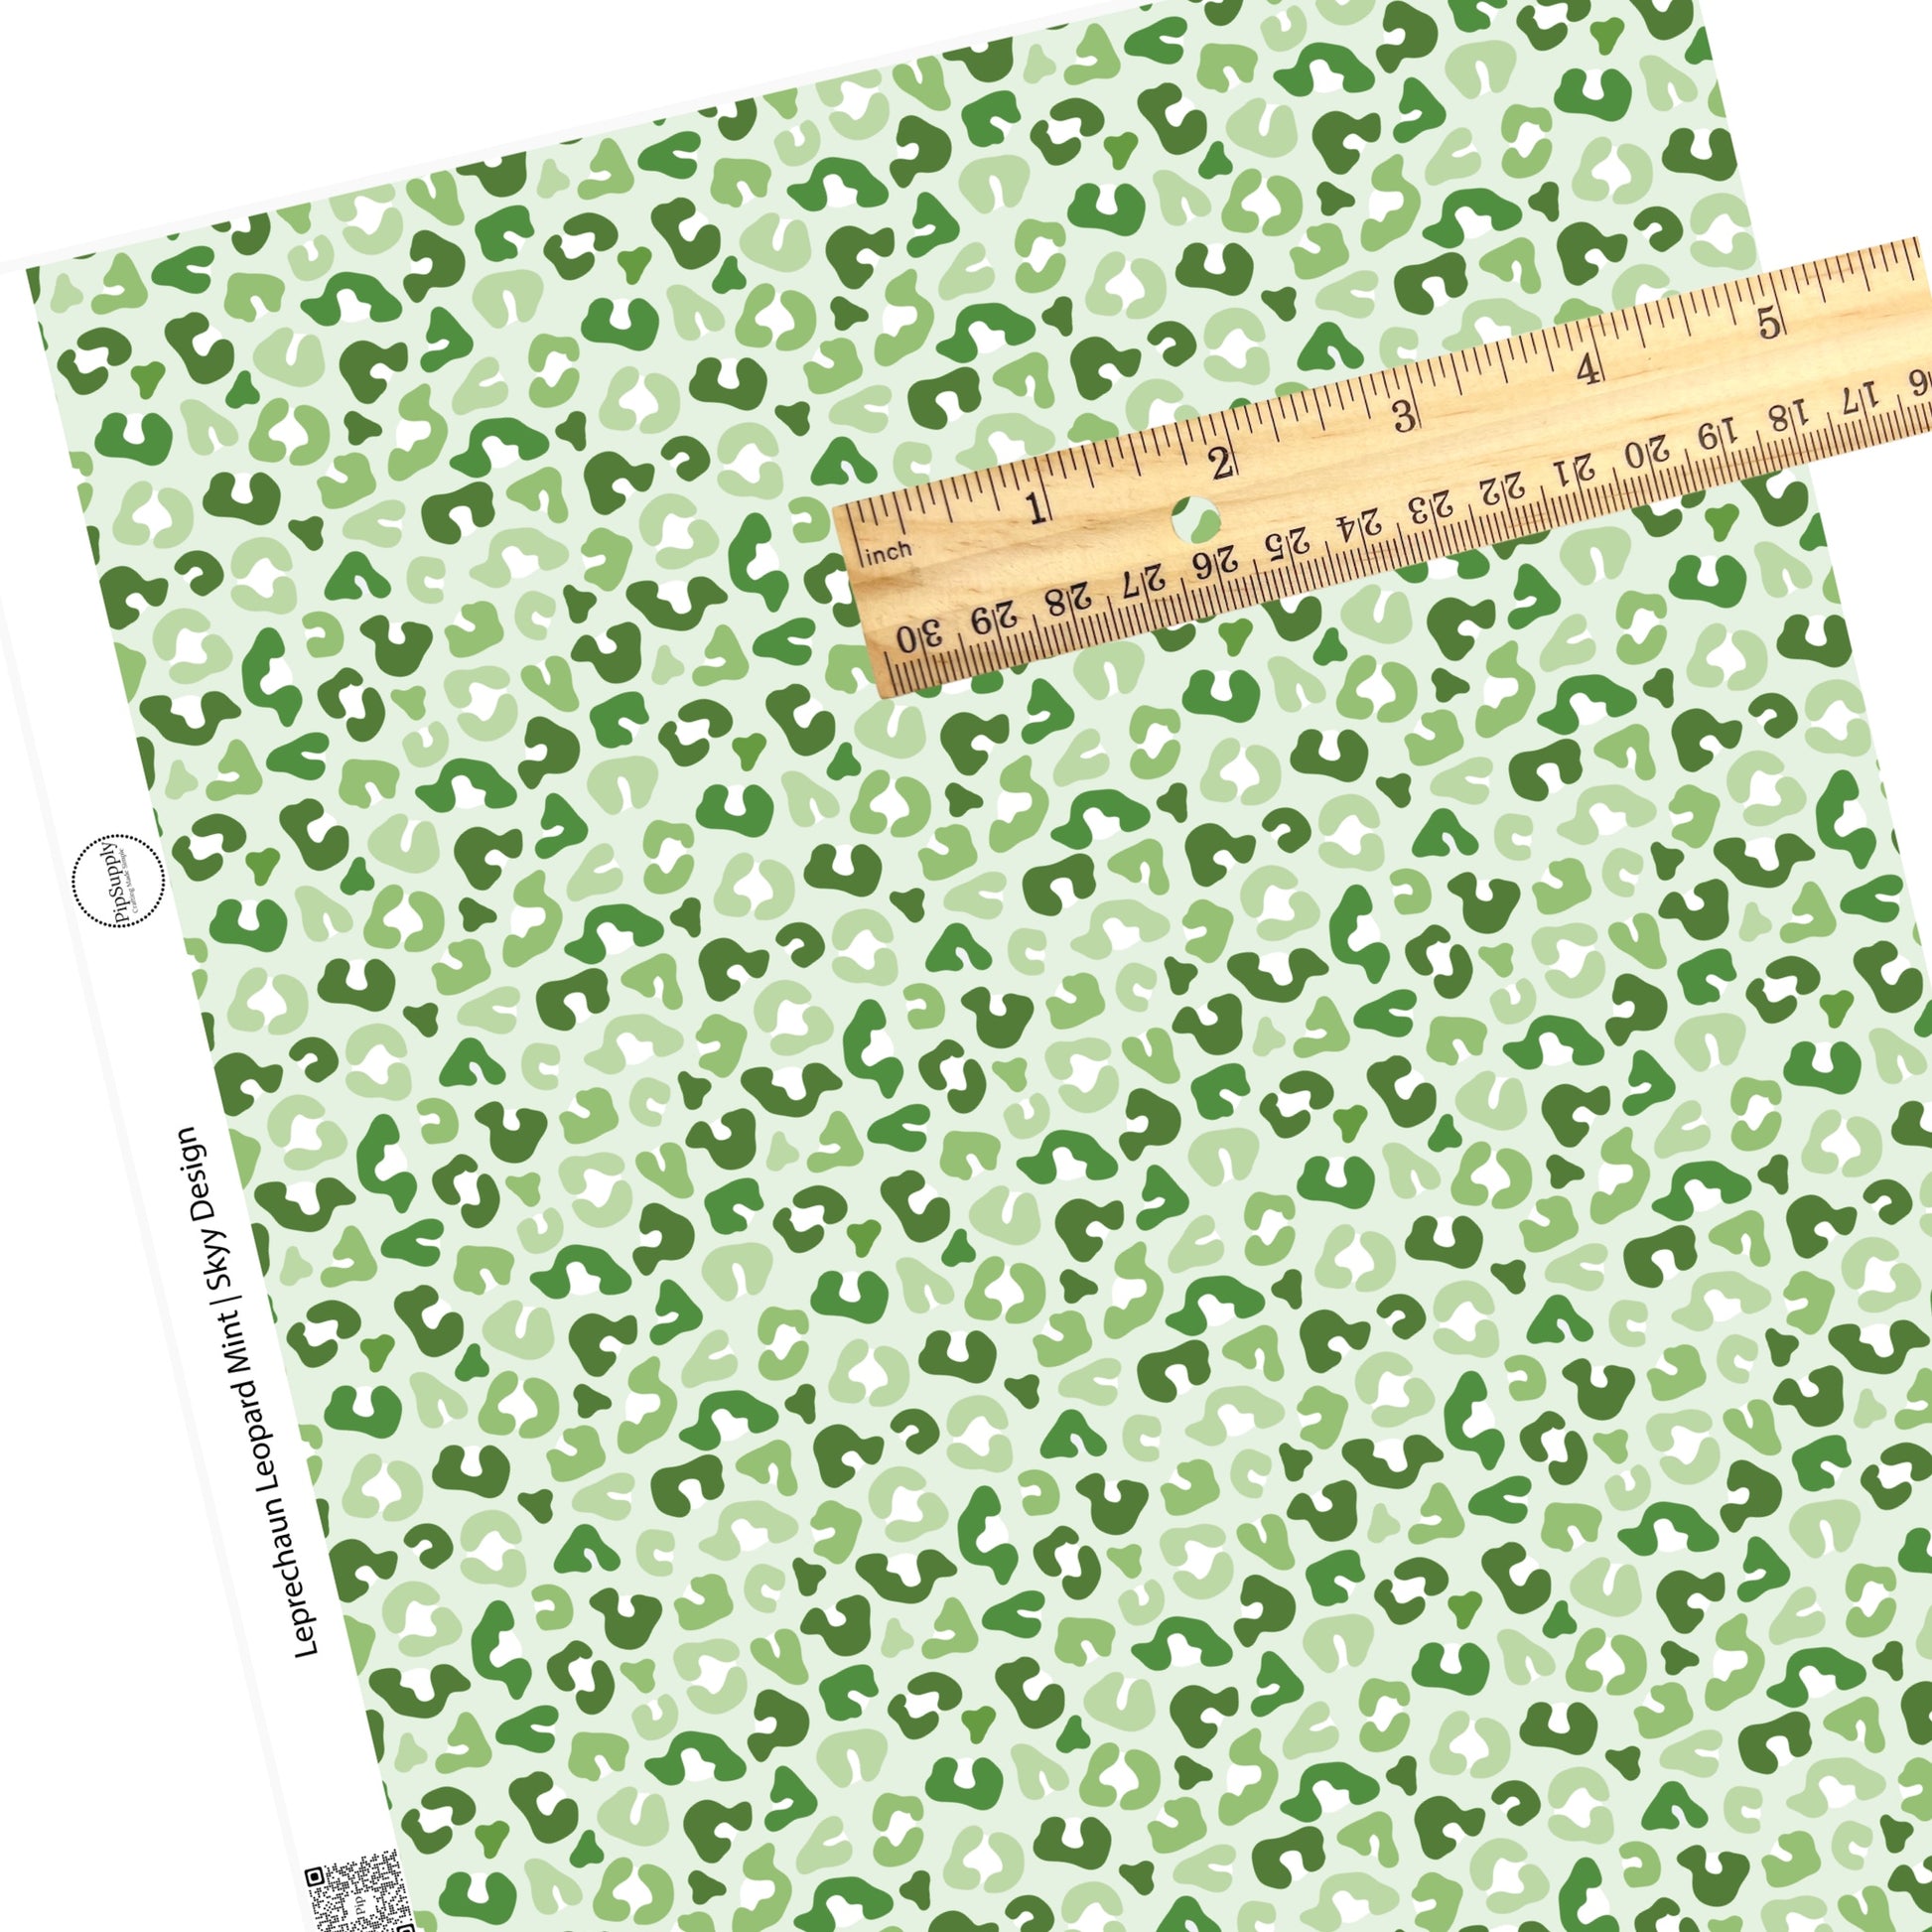 Different colors of green leopard spots on a light green faux leather sheet